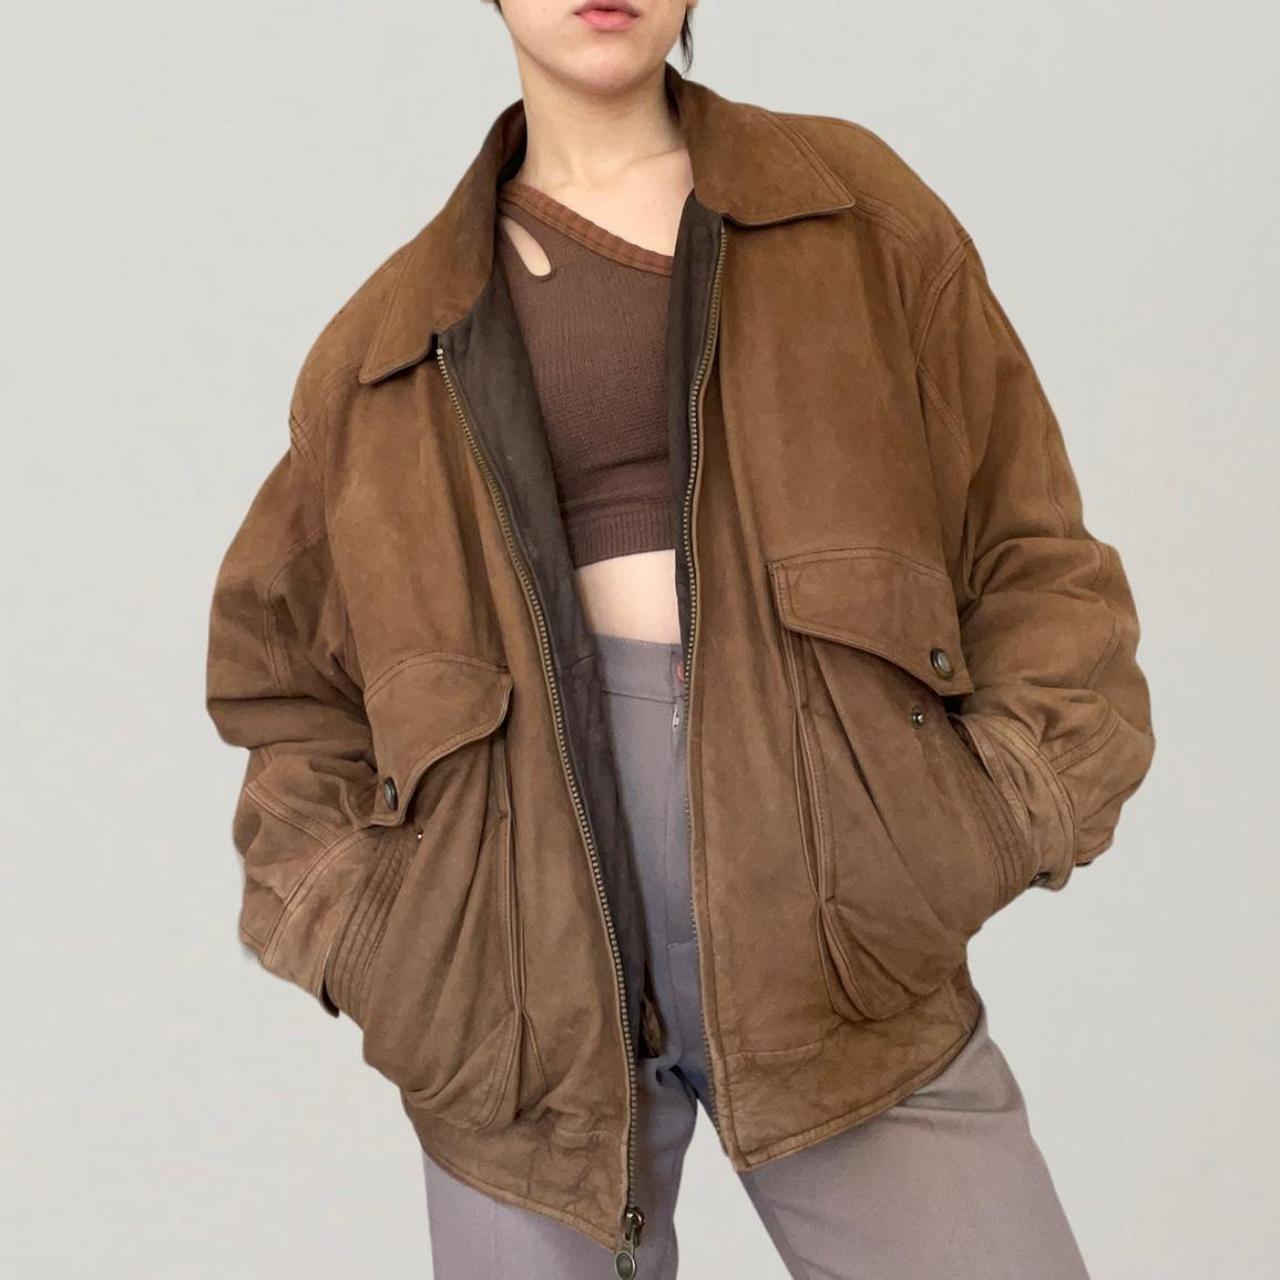 Members Only Women's Brown and Tan Jacket